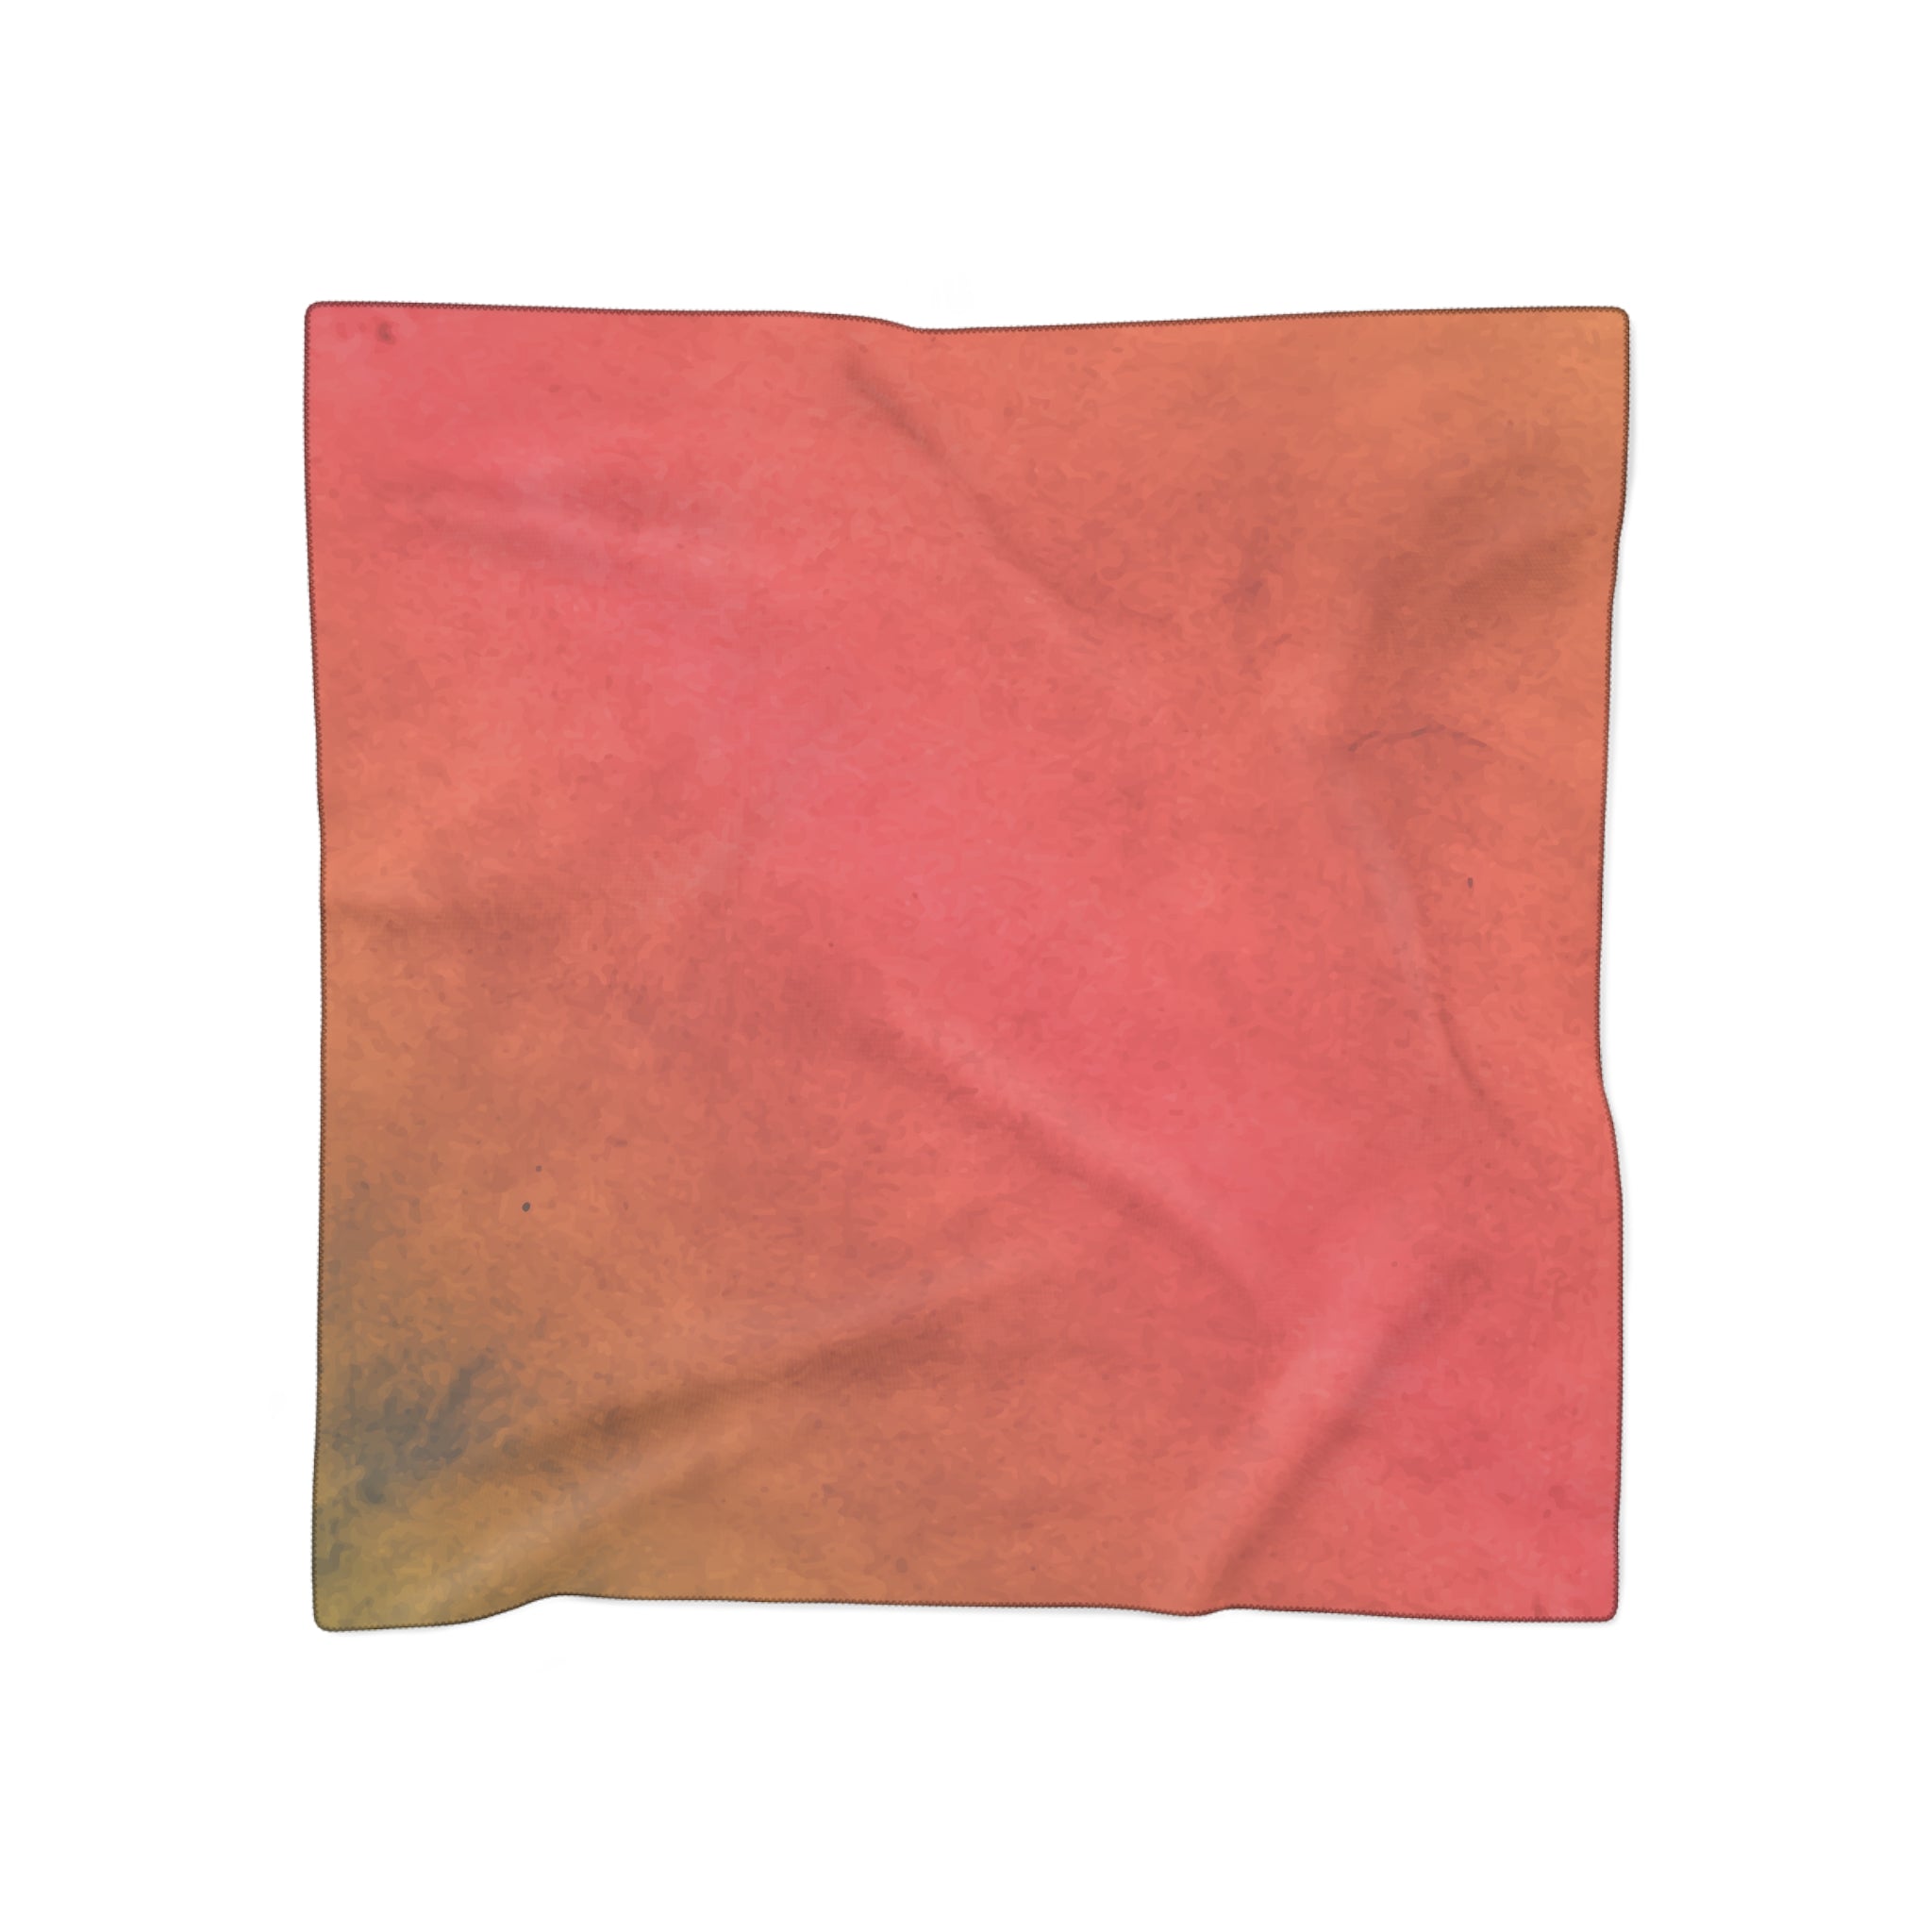 VIBES OF COLORS POLY SCARF - UGO ROMANO URPYS001